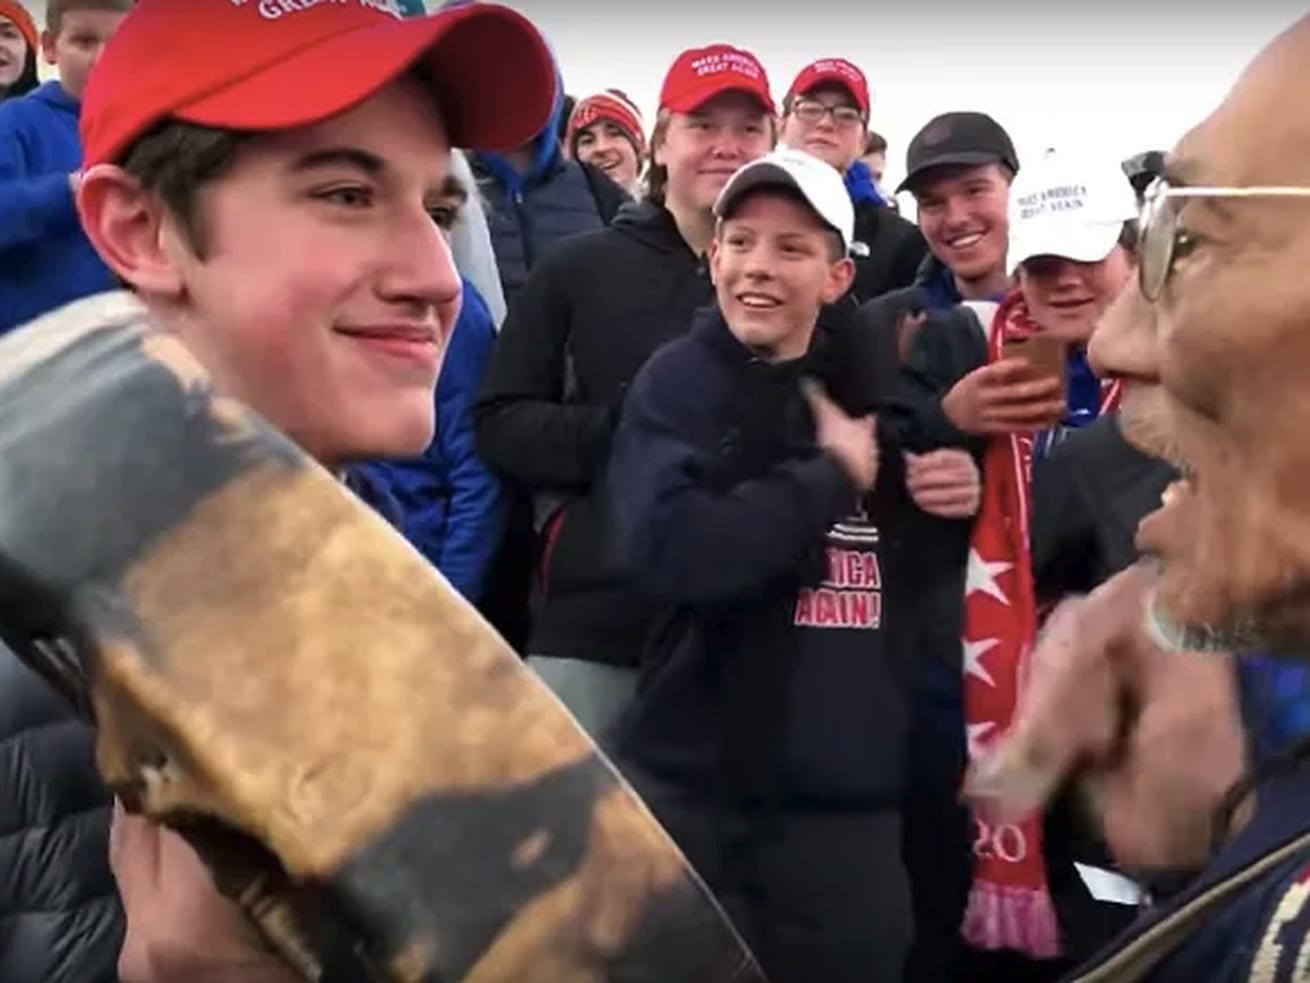 White students in MAGA gear crashed the Indigenous Peoples March and harassed participants